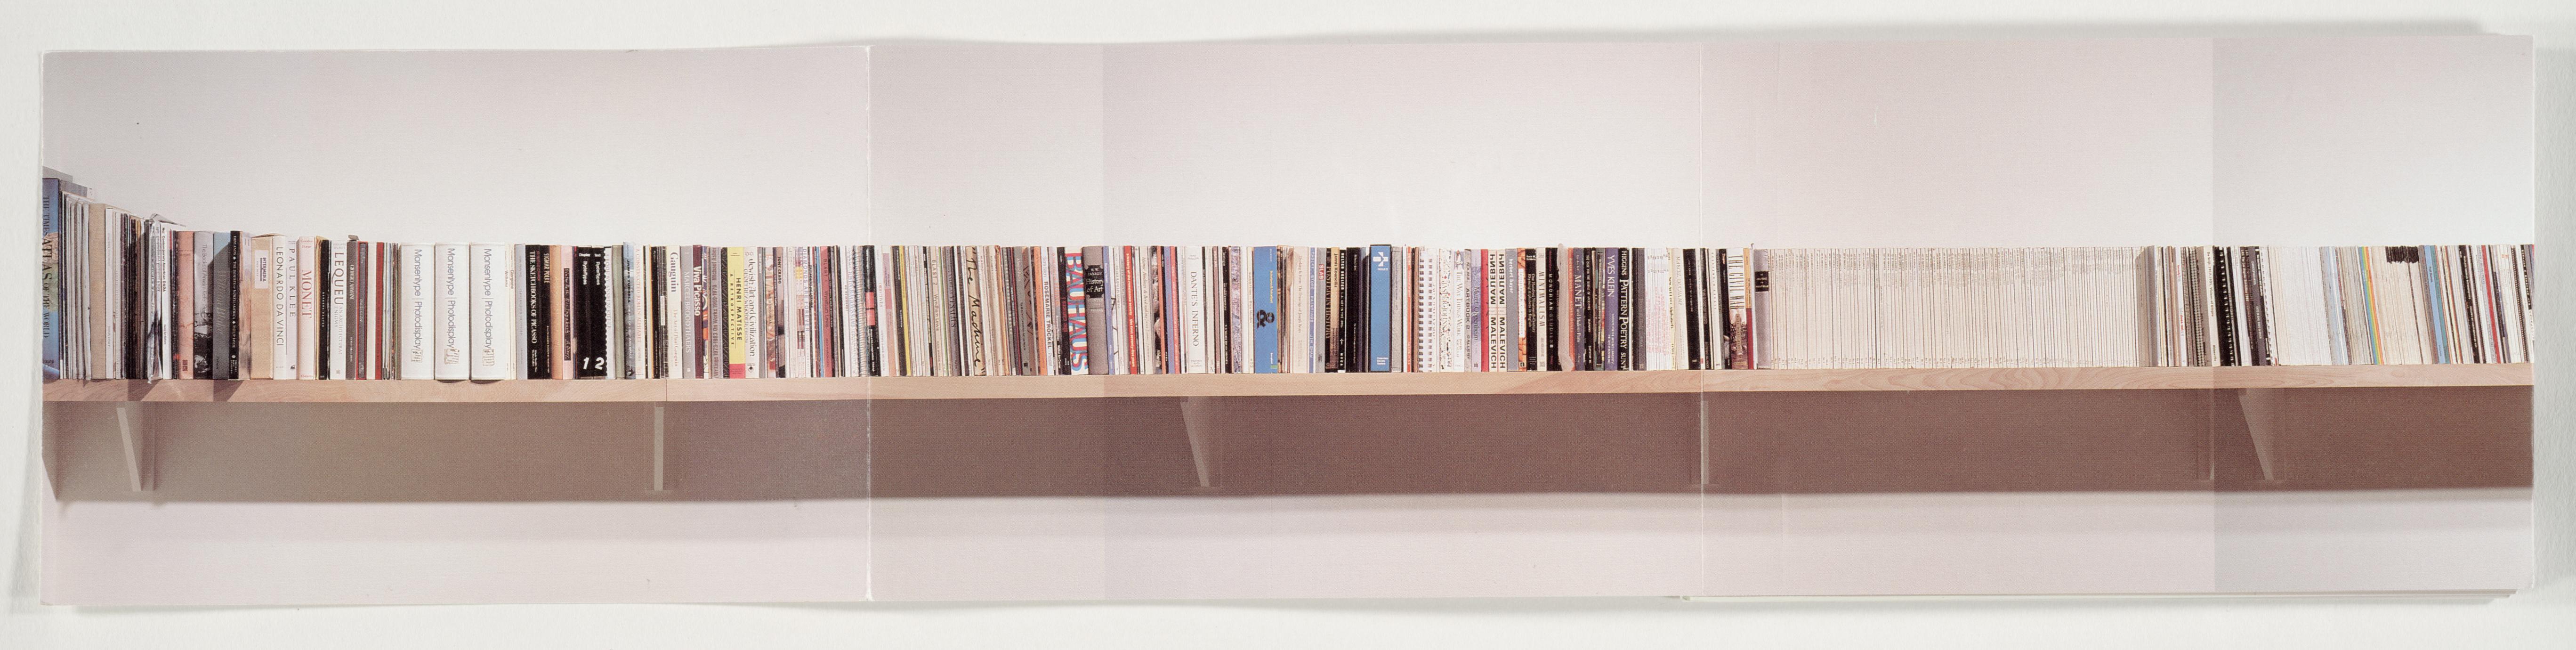 Unpacking my library : an installation (1 of 2)